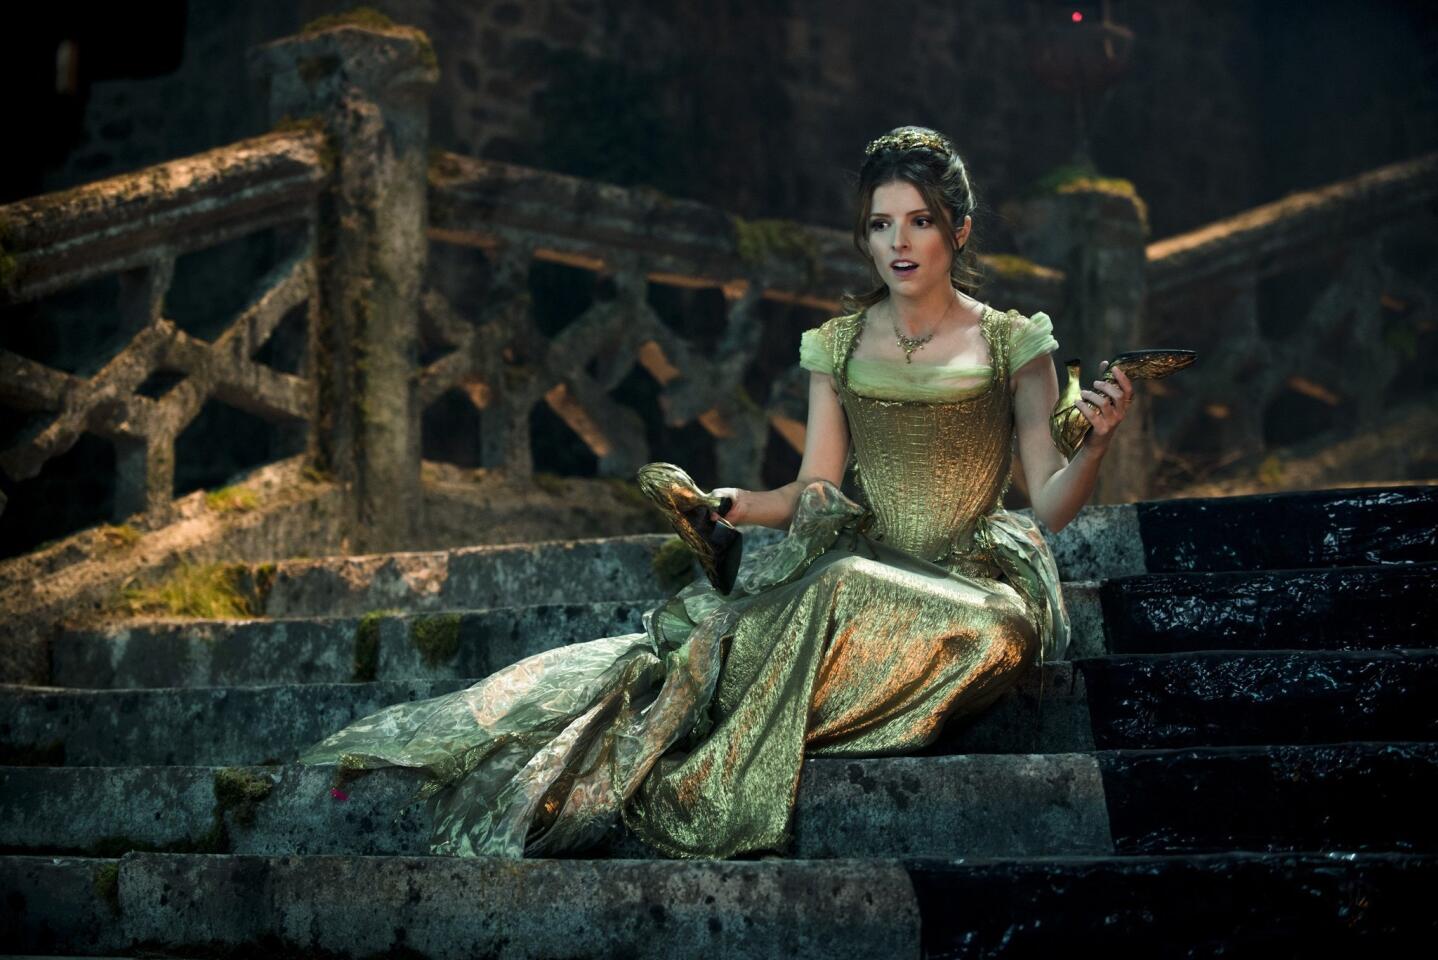 Anna Kendrick as Cinderella in "Into the Woods." Costume design by Colleen Atwood.